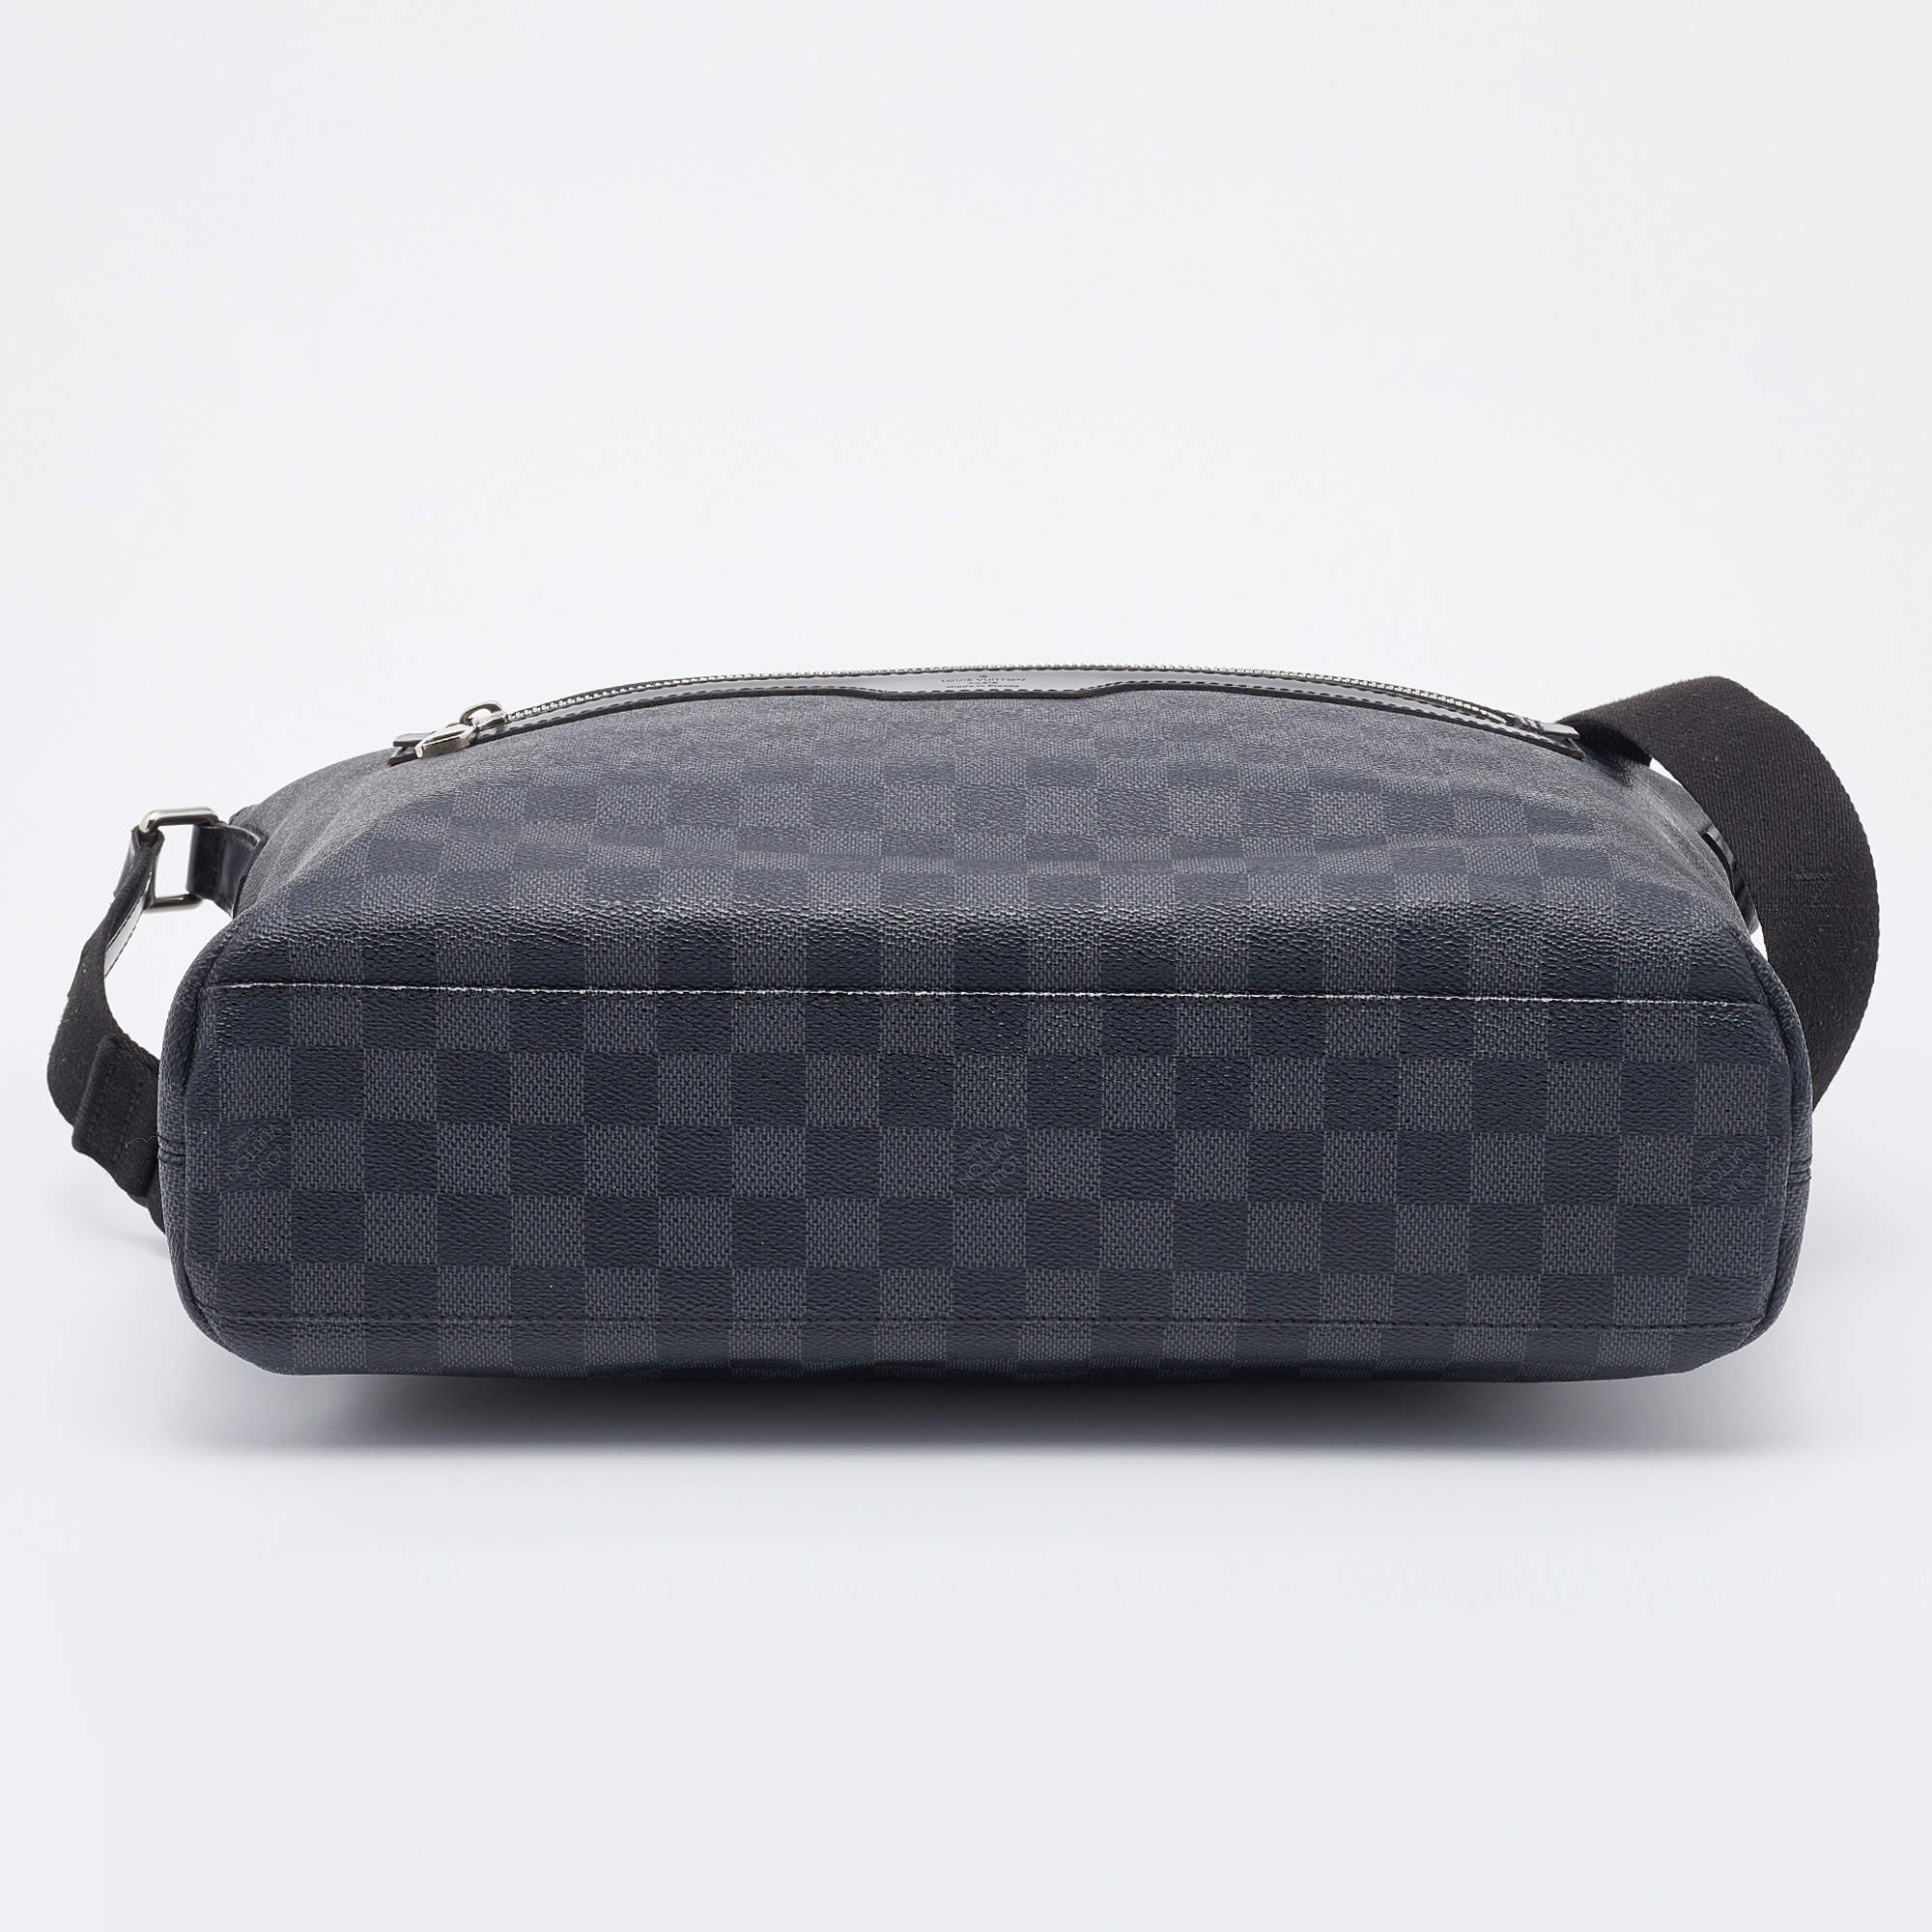 SOLD - NEW - LV Damier Graphite Mick PM_Louis Vuitton_BRANDS_MILAN CLASSIC  Luxury Trade Company Since 2007